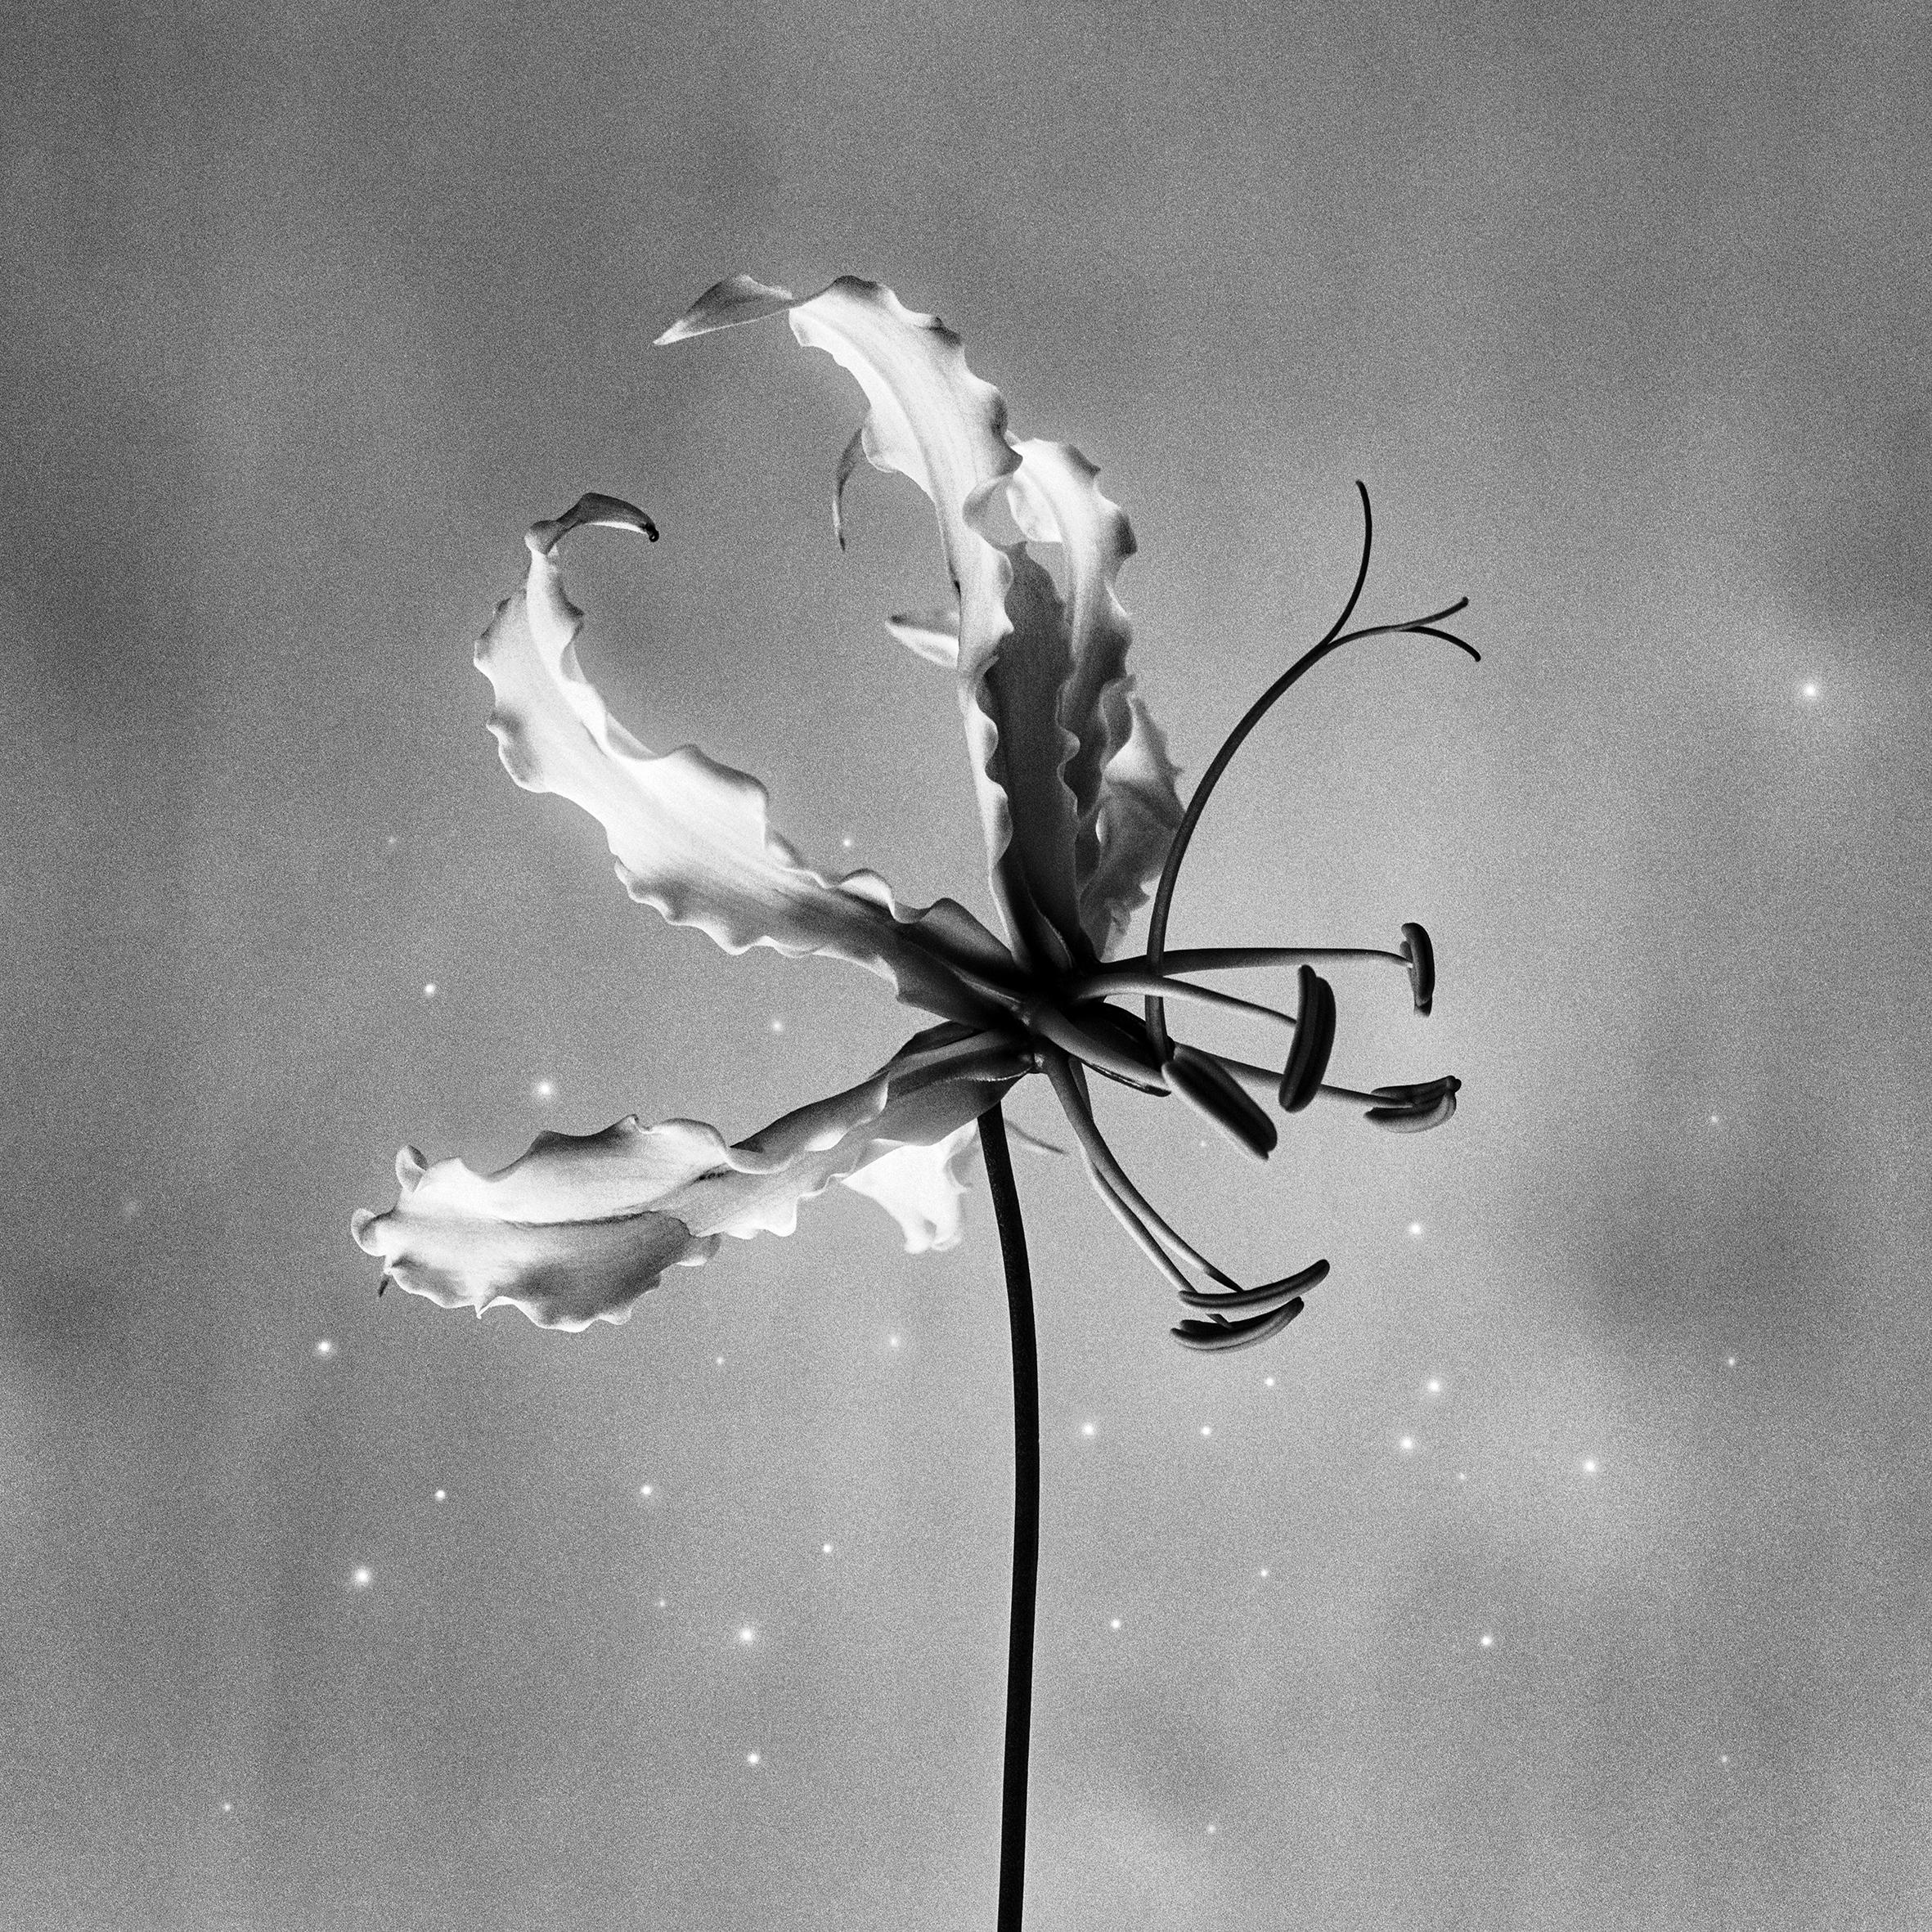 Gloriosa - black and white floral photography, limited edition of 20